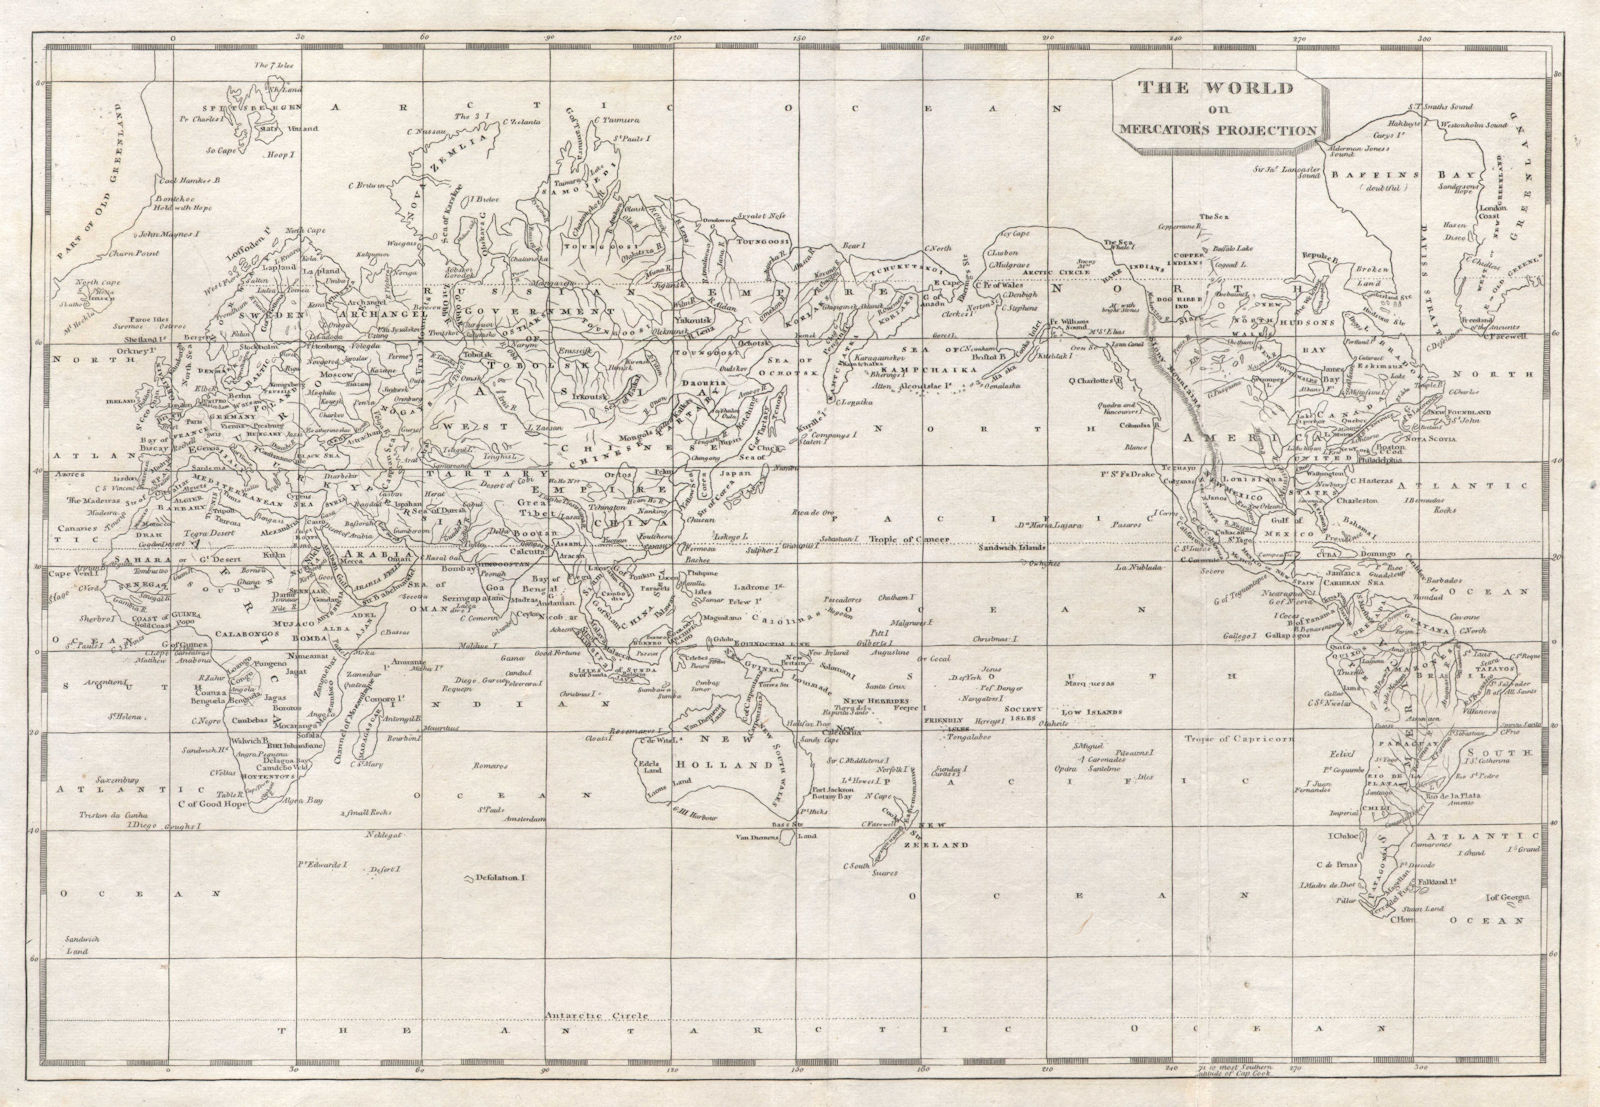 Associate Product The World on Mercator's Projection by Arrowsmith & Lewis 1812 old antique map